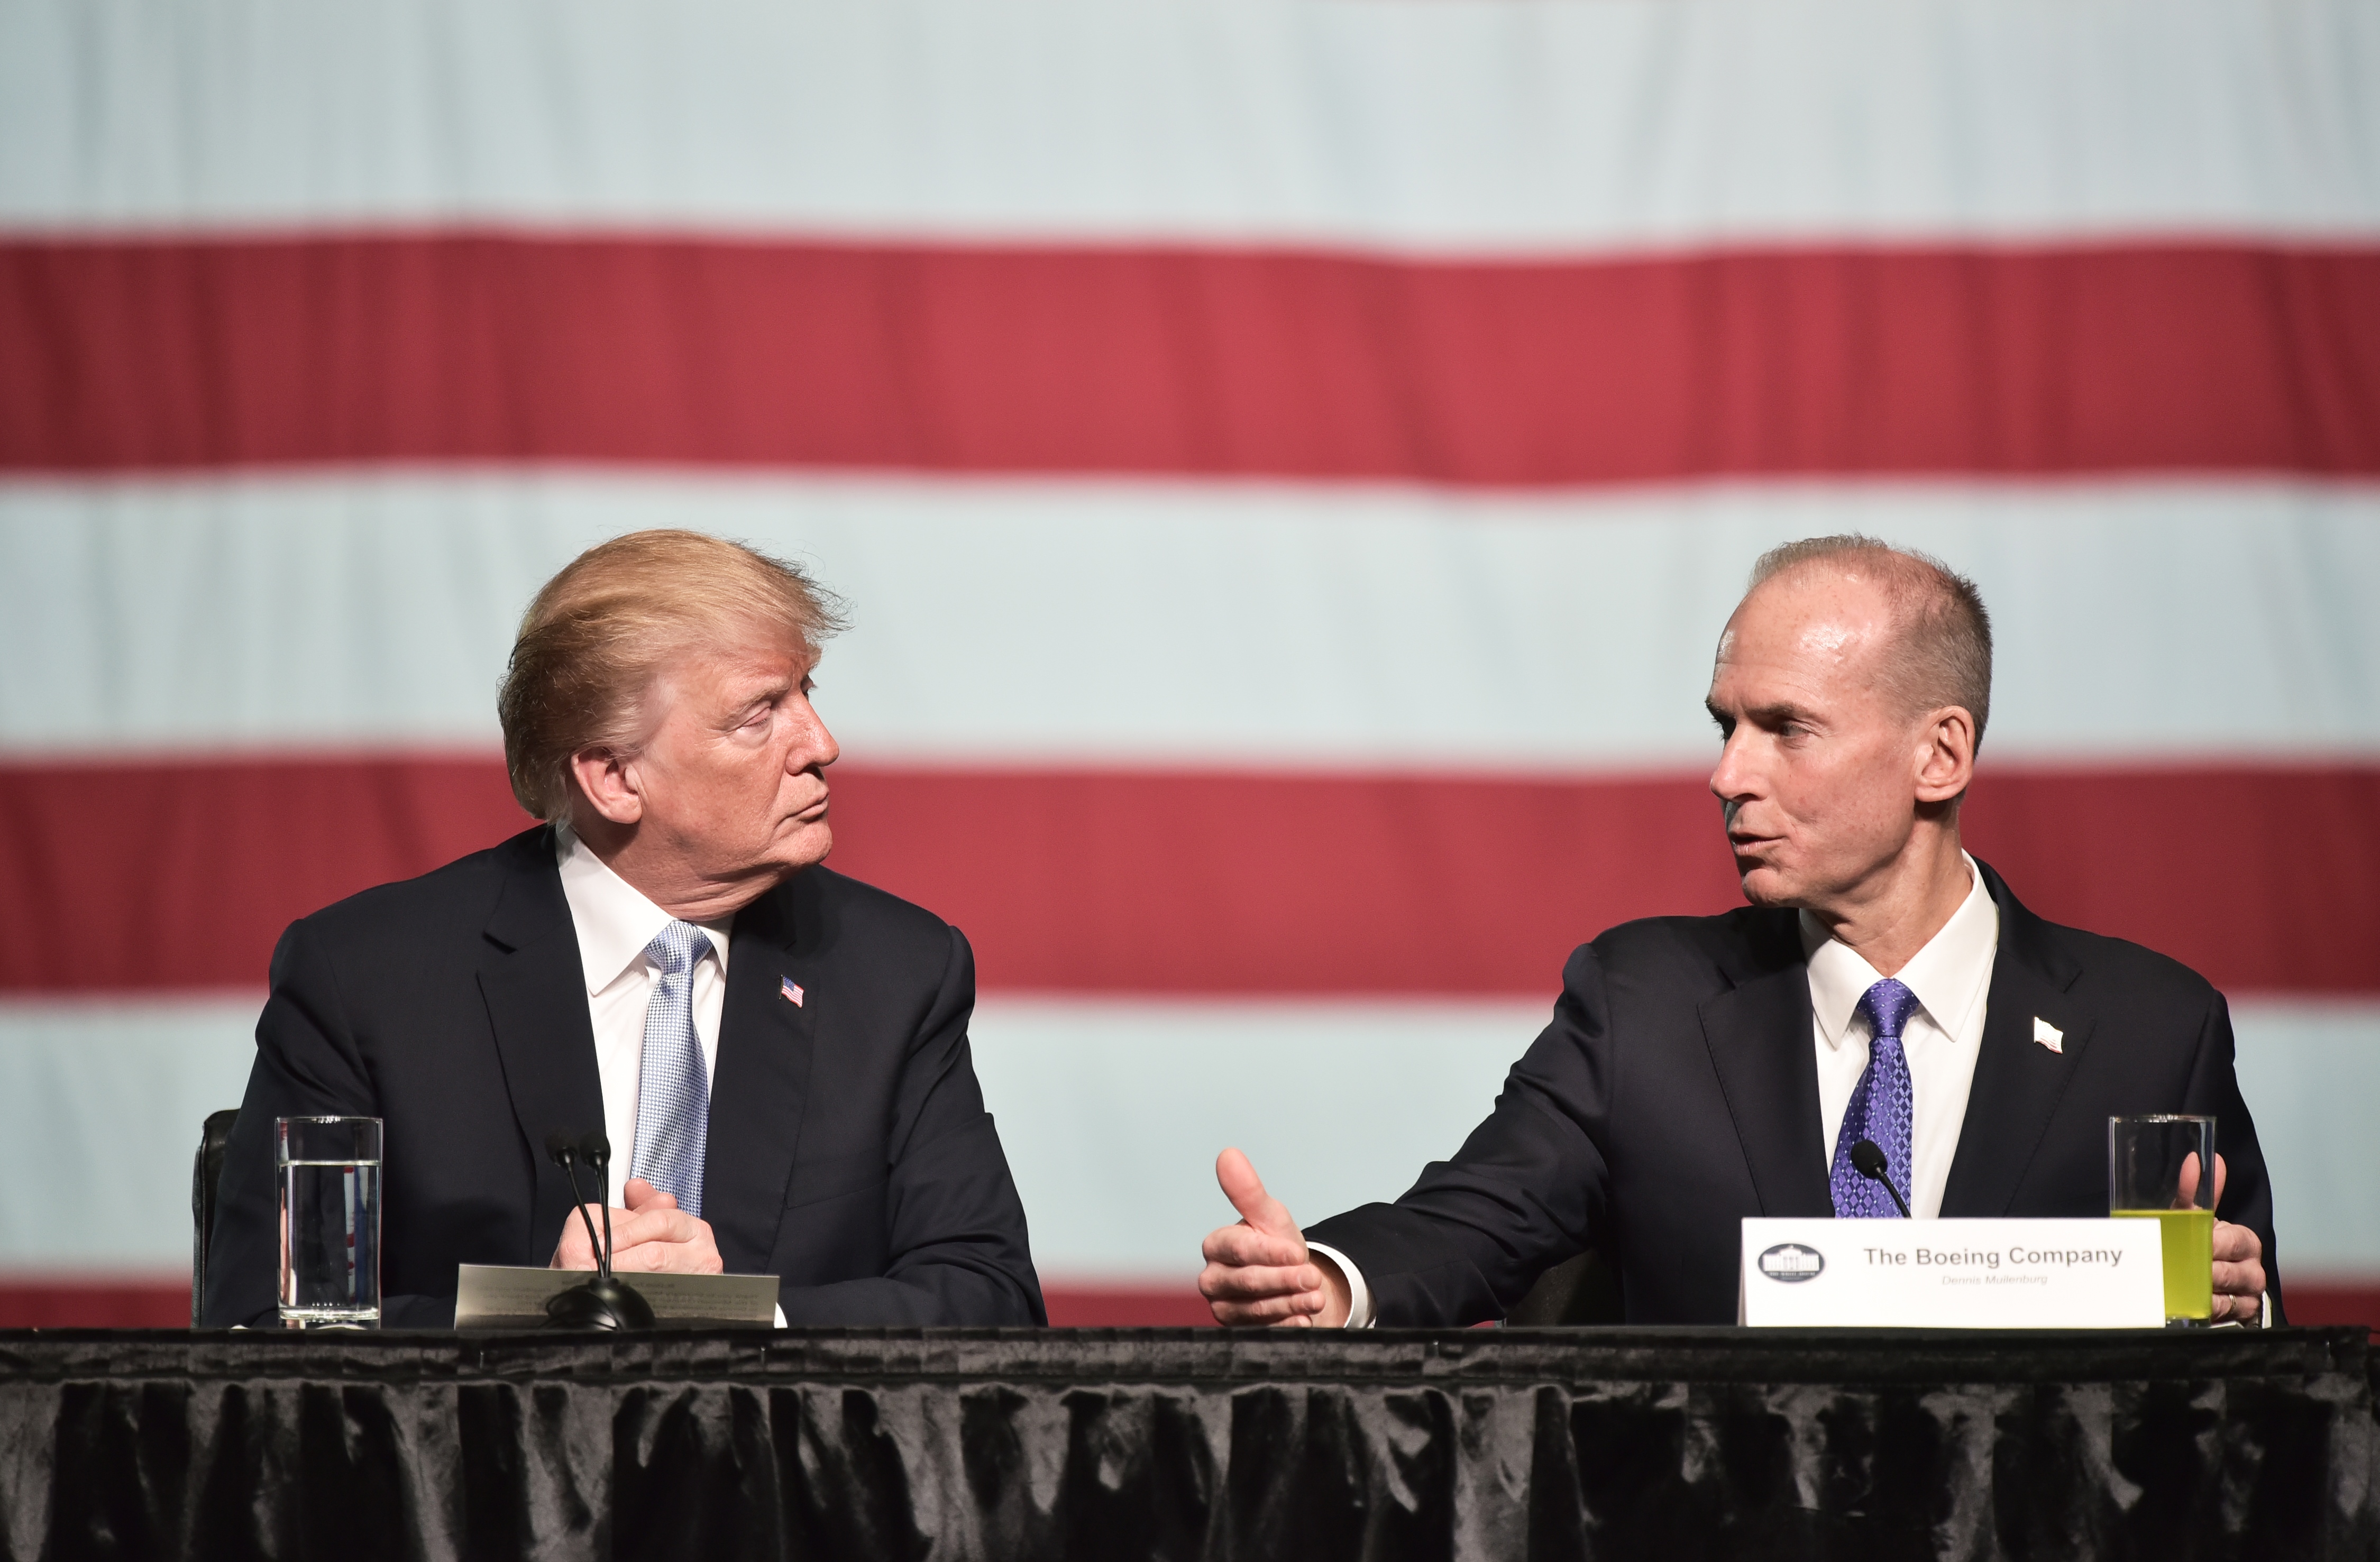 Boeing CEO Dennis Muilenburg speaks during a round table discussion with President Donald Trump following a tour of the Boeing Company in St. Louis, Missouri on March 14, 2018.